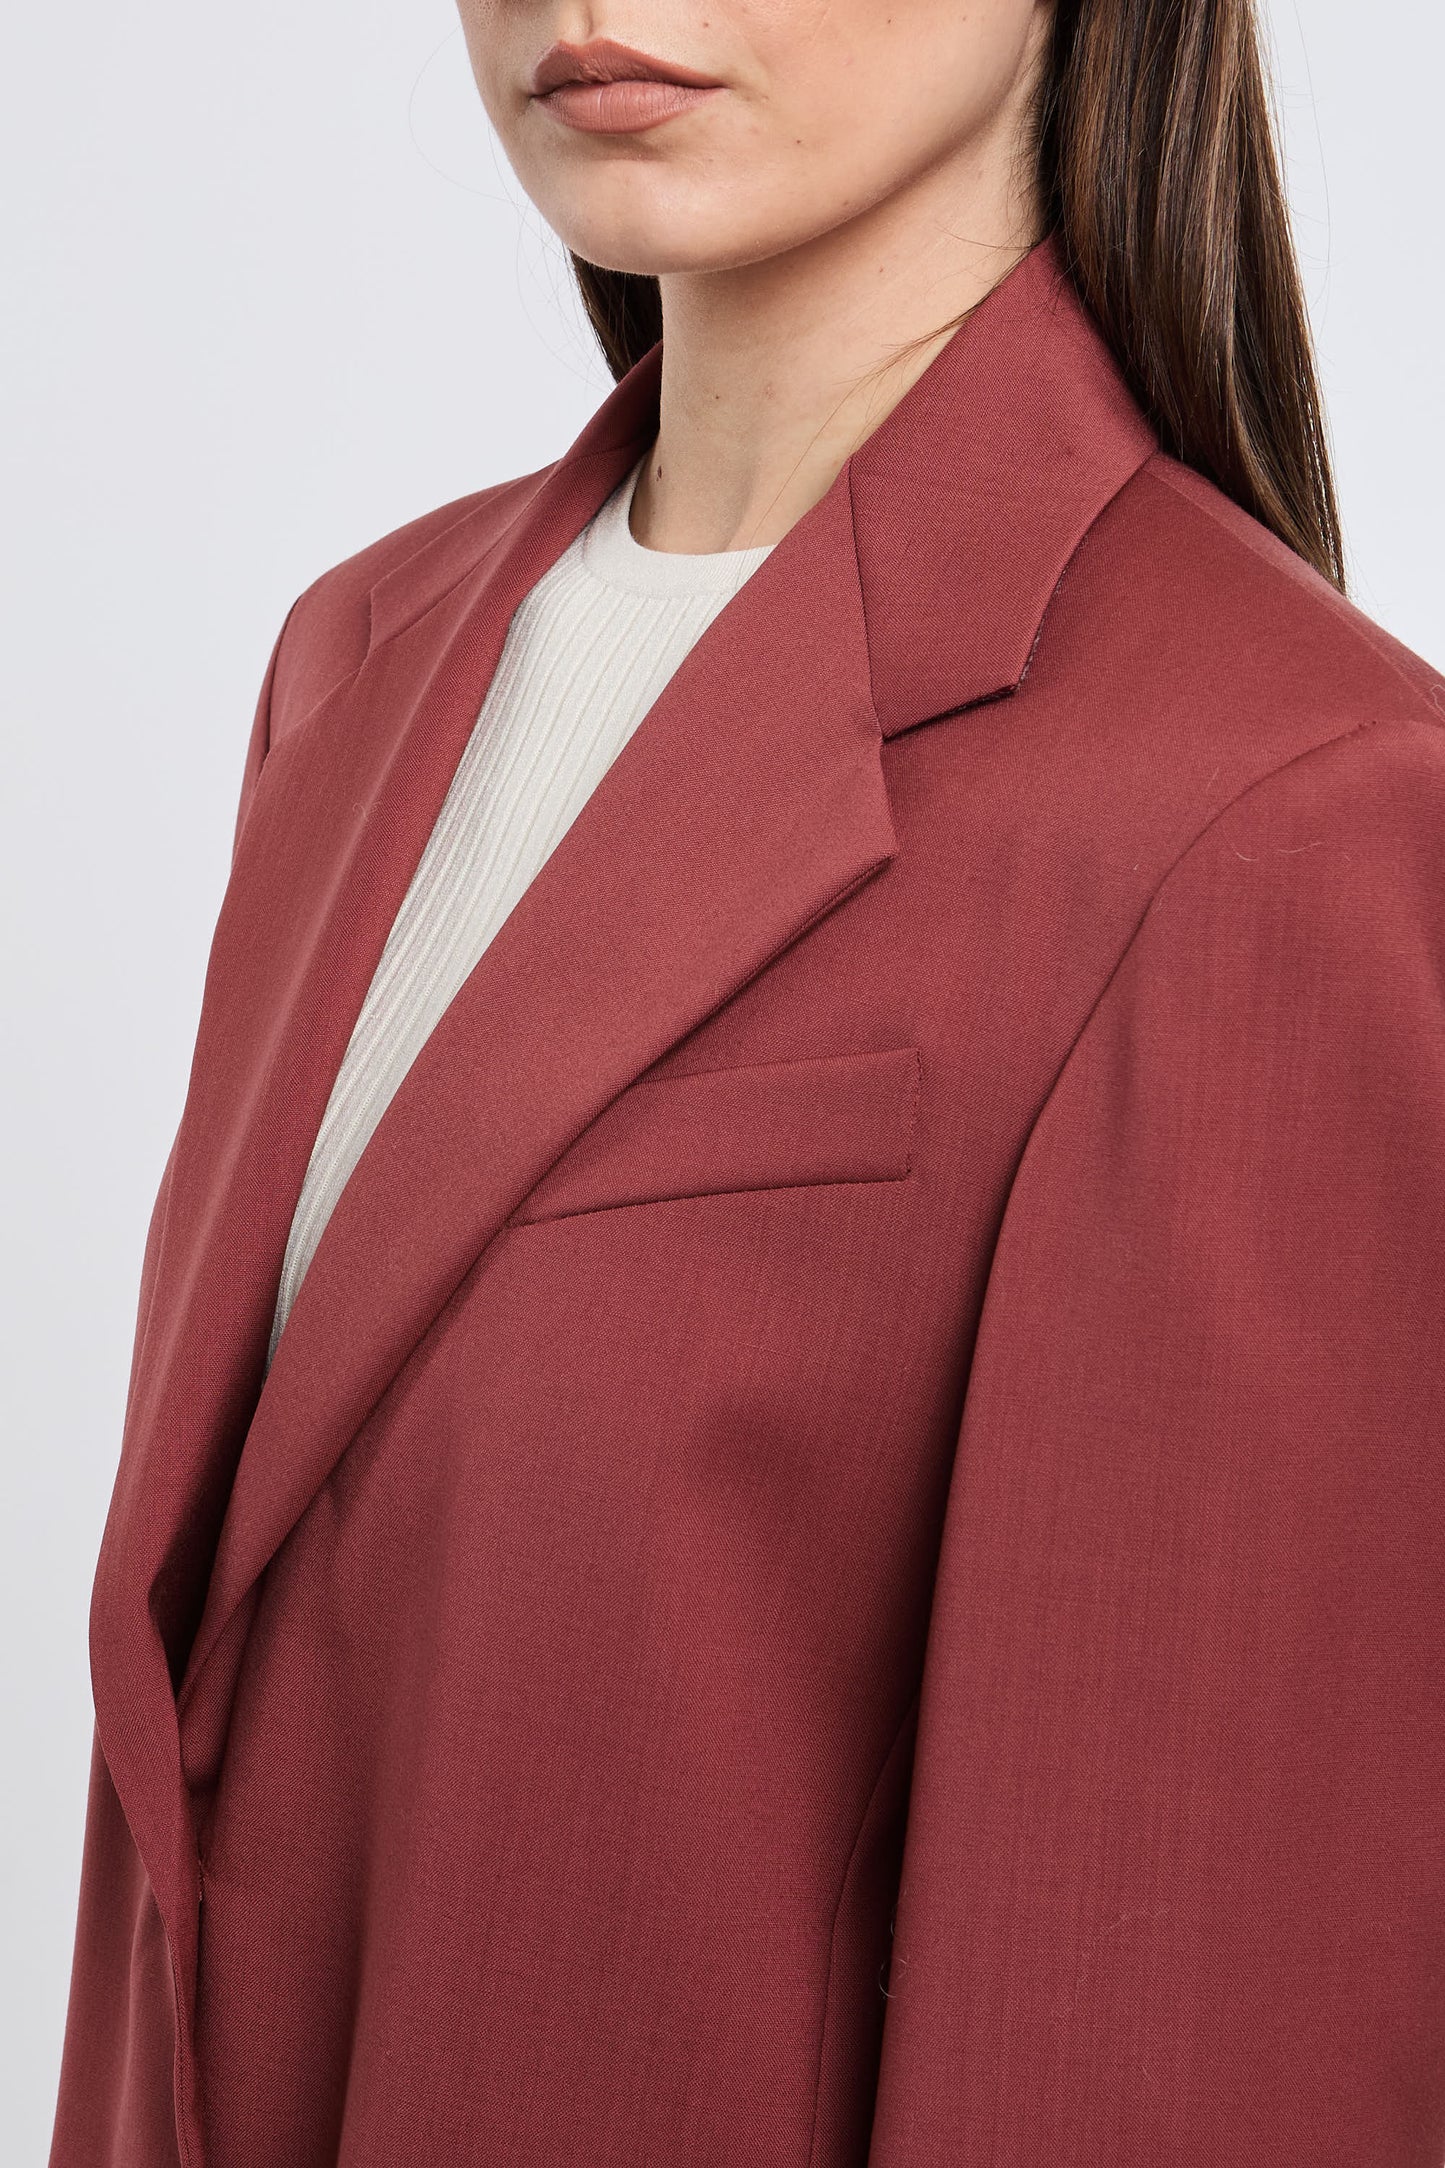  Max Mara Weekend Jacket 100% Wv Red Rosso Donna - 6